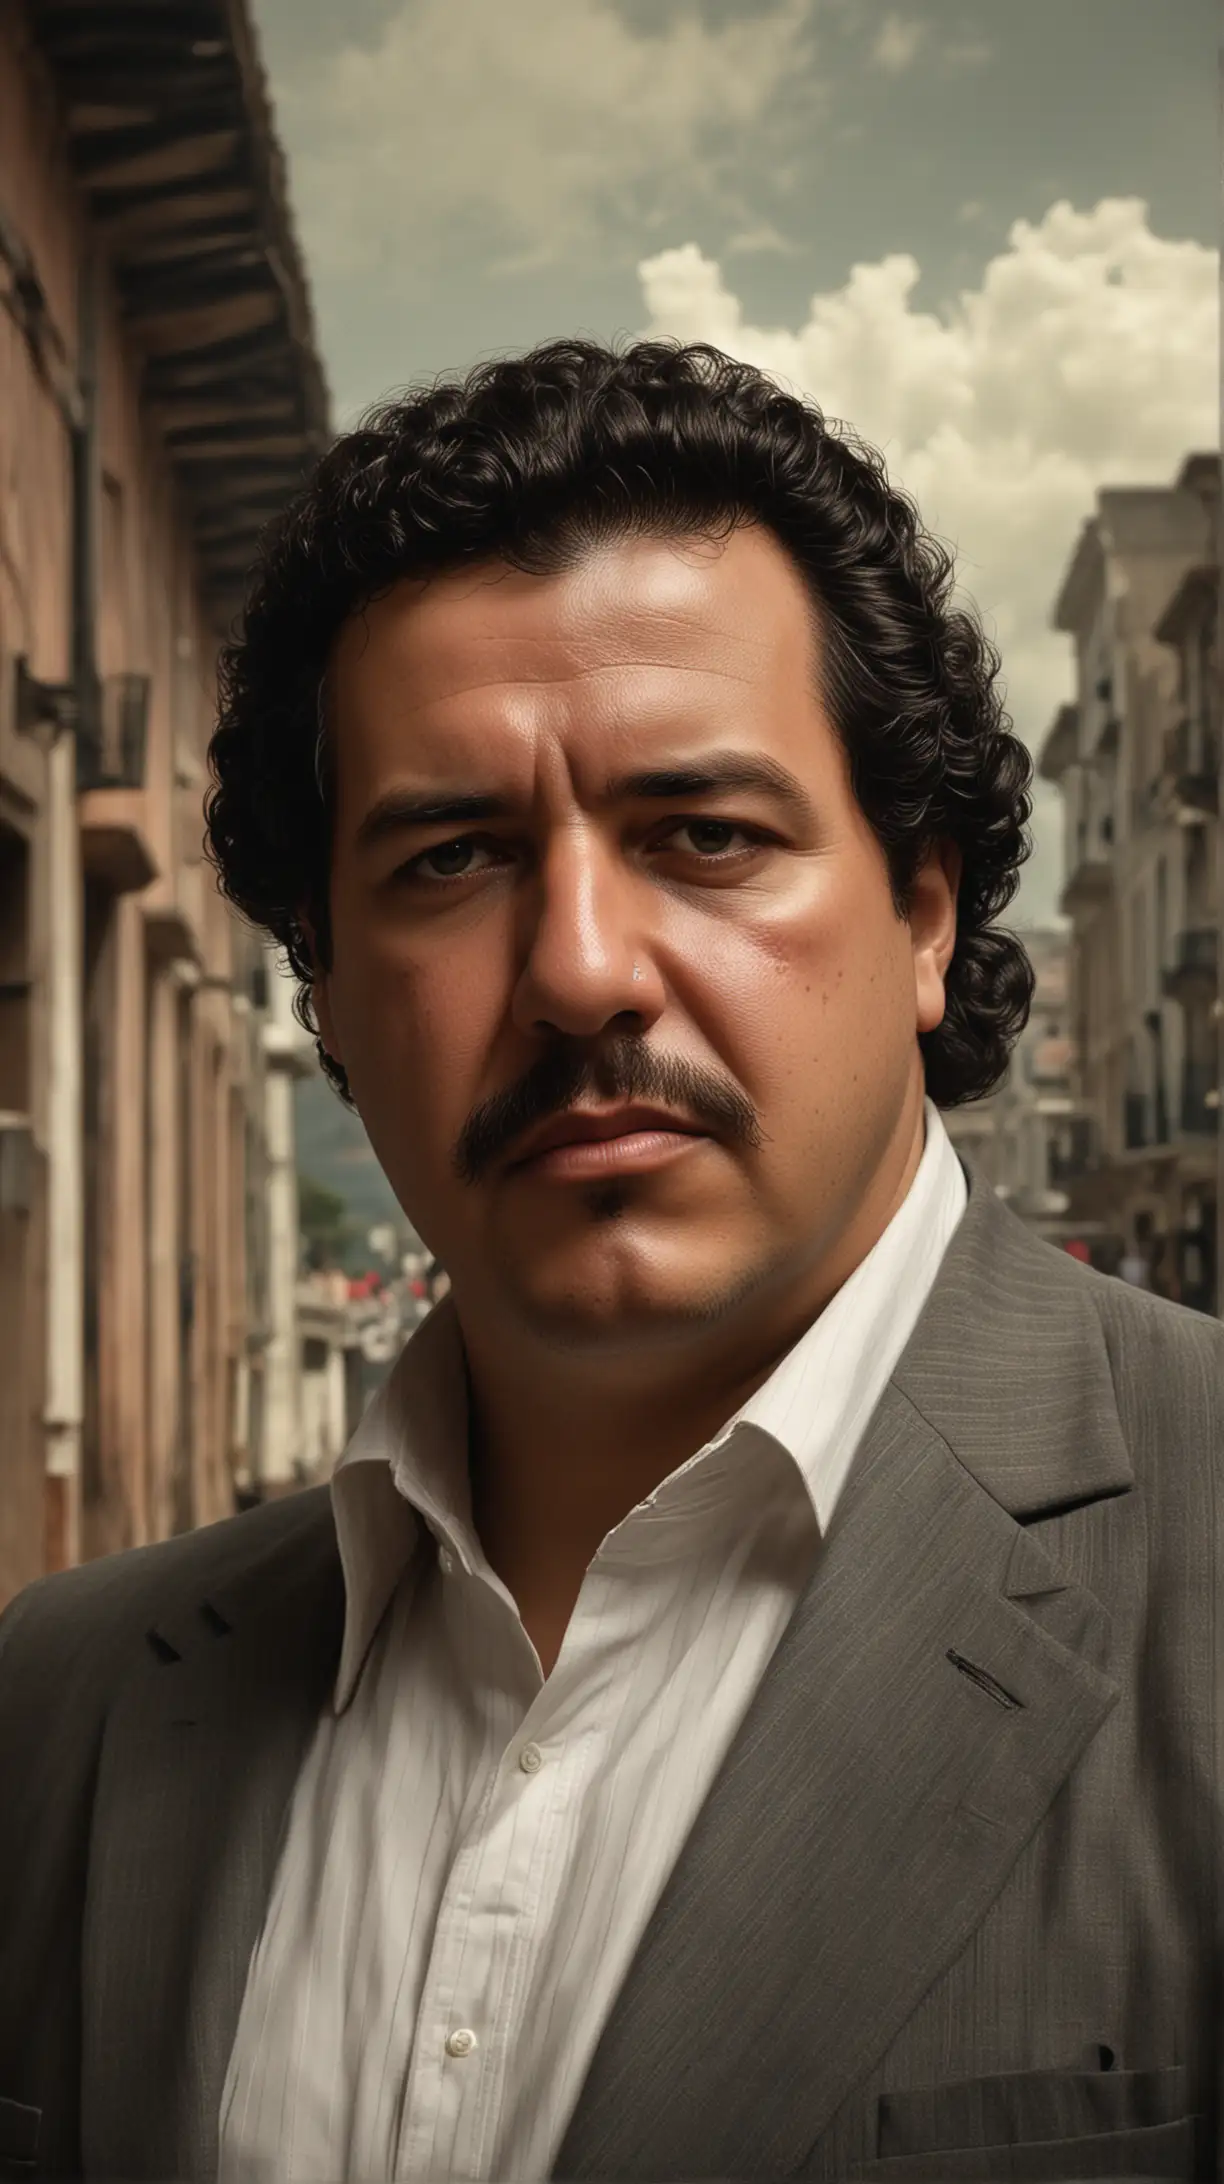 Portrait of Pablo Escobar:

Facial Features: Render Escobar's face with a strong jawline and piercing eyes, reflecting his determination and intensity. Show his prominent mustache and hairstyle typical of the 1980s.

Expression: Capture a thoughtful expression mixed with a hint of defiance, conveying his confidence and cunning nature. Avoid glamorizing or vilifying, aiming for a nuanced portrayal.

Attire: Dress Escobar in a tailored suit or a casual outfit that signifies his status as a powerful figure in Colombian society. Include details such as luxury watches or rings to emphasize his wealth.

Backdrop: Place Escobar against a background that evokes the ambiance of Medellin during the height of his power. Consider incorporating elements like cityscape views, hints of opulence, or subtle nods to his criminal activities.

Lighting: Use dramatic lighting to highlight his features and add depth to the portrait. Consider shadows that suggest both secrecy and the looming presence of his notoriety.

Emotive Context: Surround the portrait with symbolic elements that reflect his dual legacy—showing aspects of both admiration and condemnation. Incorporate subtle hints of his philanthropic endeavors alongside reminders of violence and corruption.

Narrative Tone: Aim for a neutral tone that allows viewers to interpret the portrait’s significance. Avoid sensationalizing or glorifying Escobar, instead portraying him as a figure of historical intrigue and complexity.